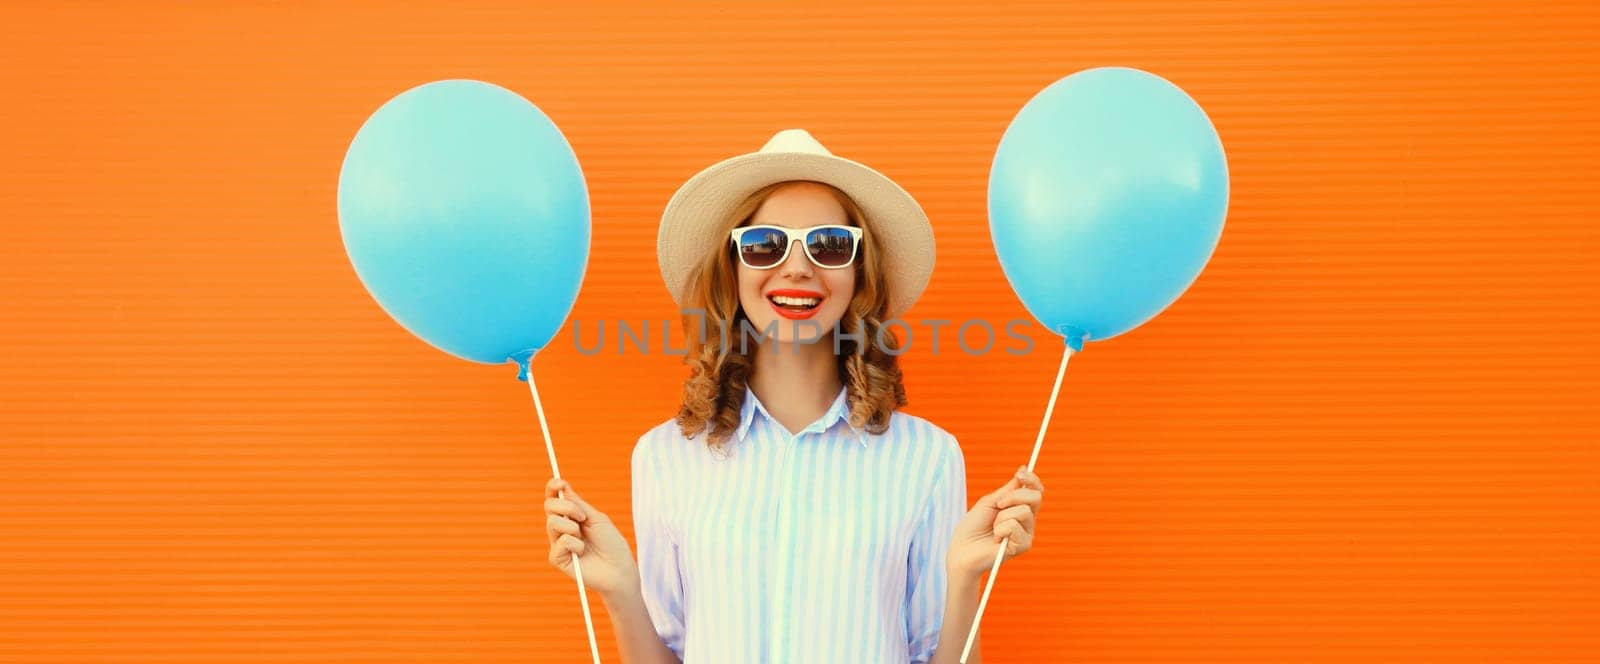 Portrait of happy smiling young woman with blue balloon wearing summer straw hat on orange background